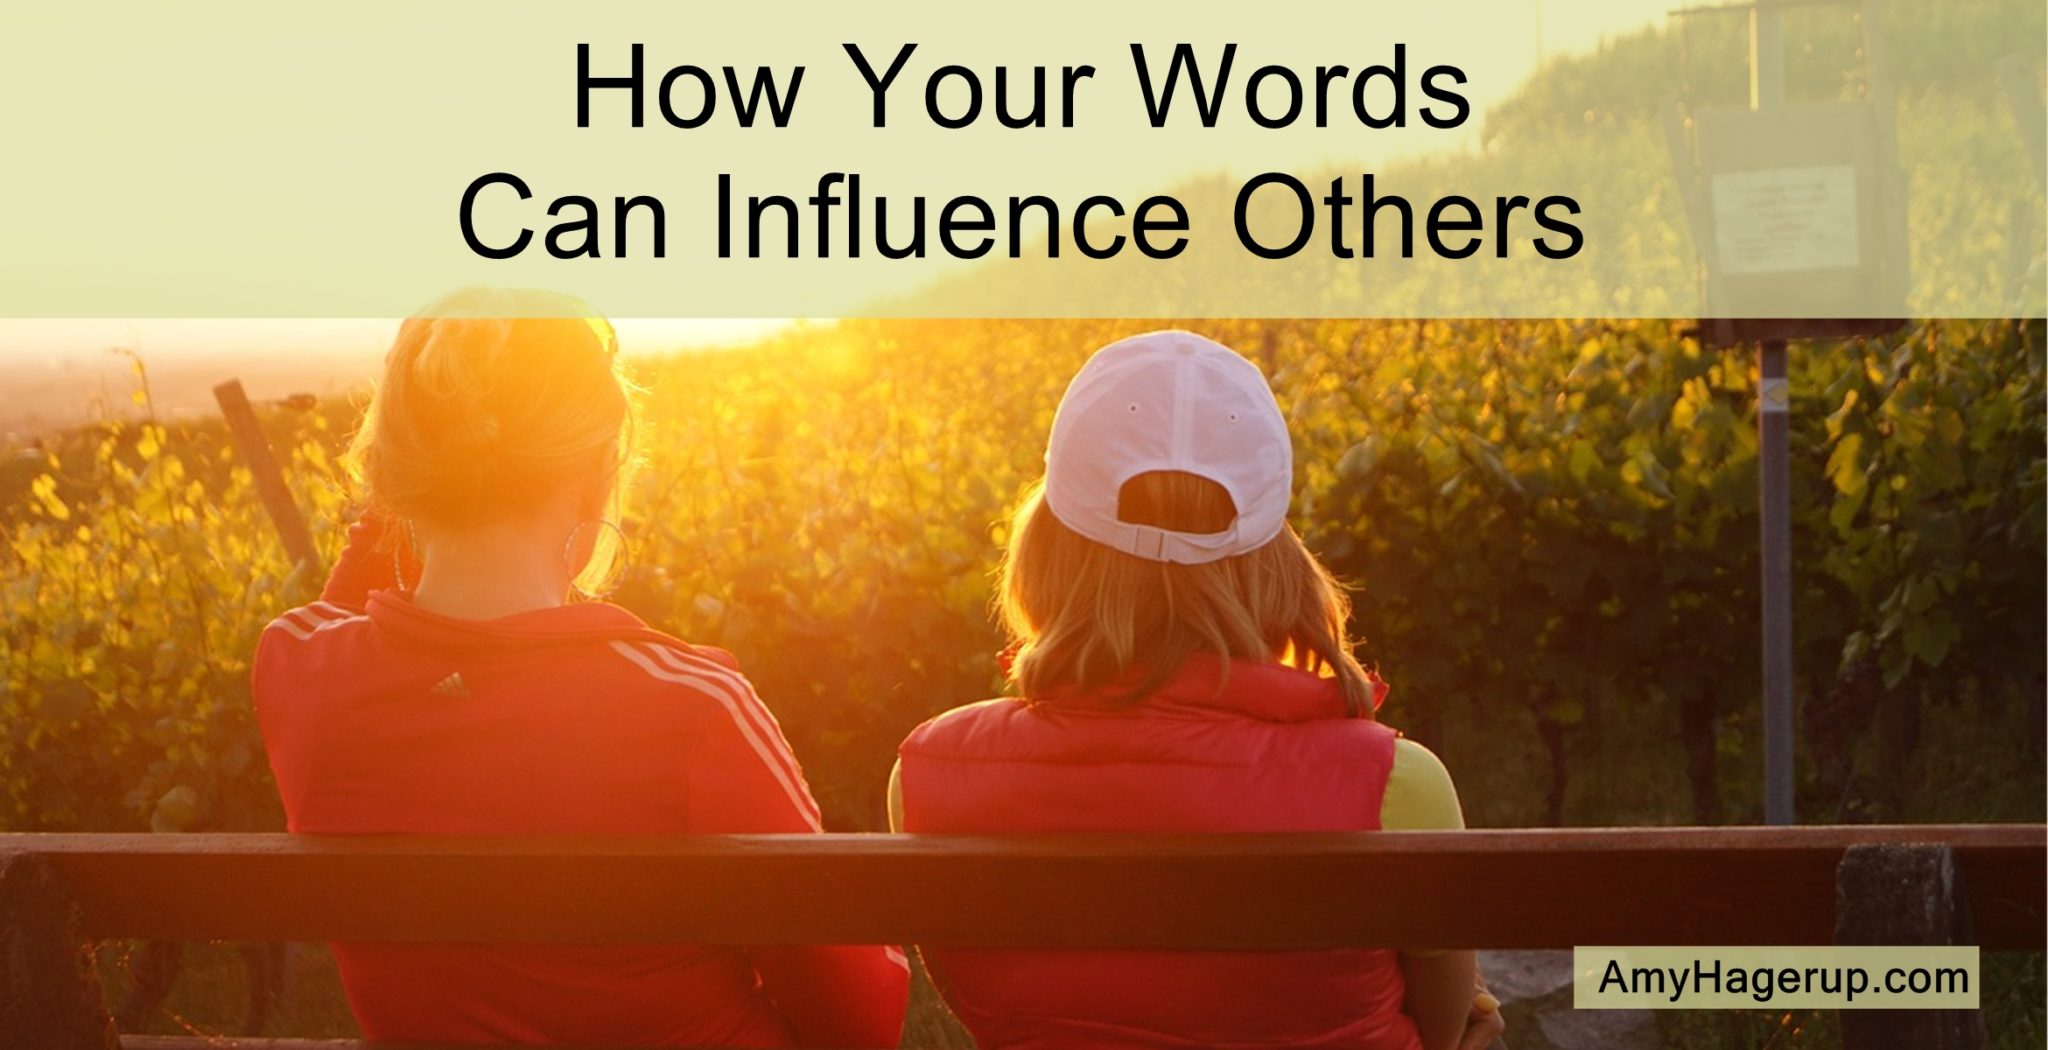 Our words - both what we say and what we write - influence others every day.